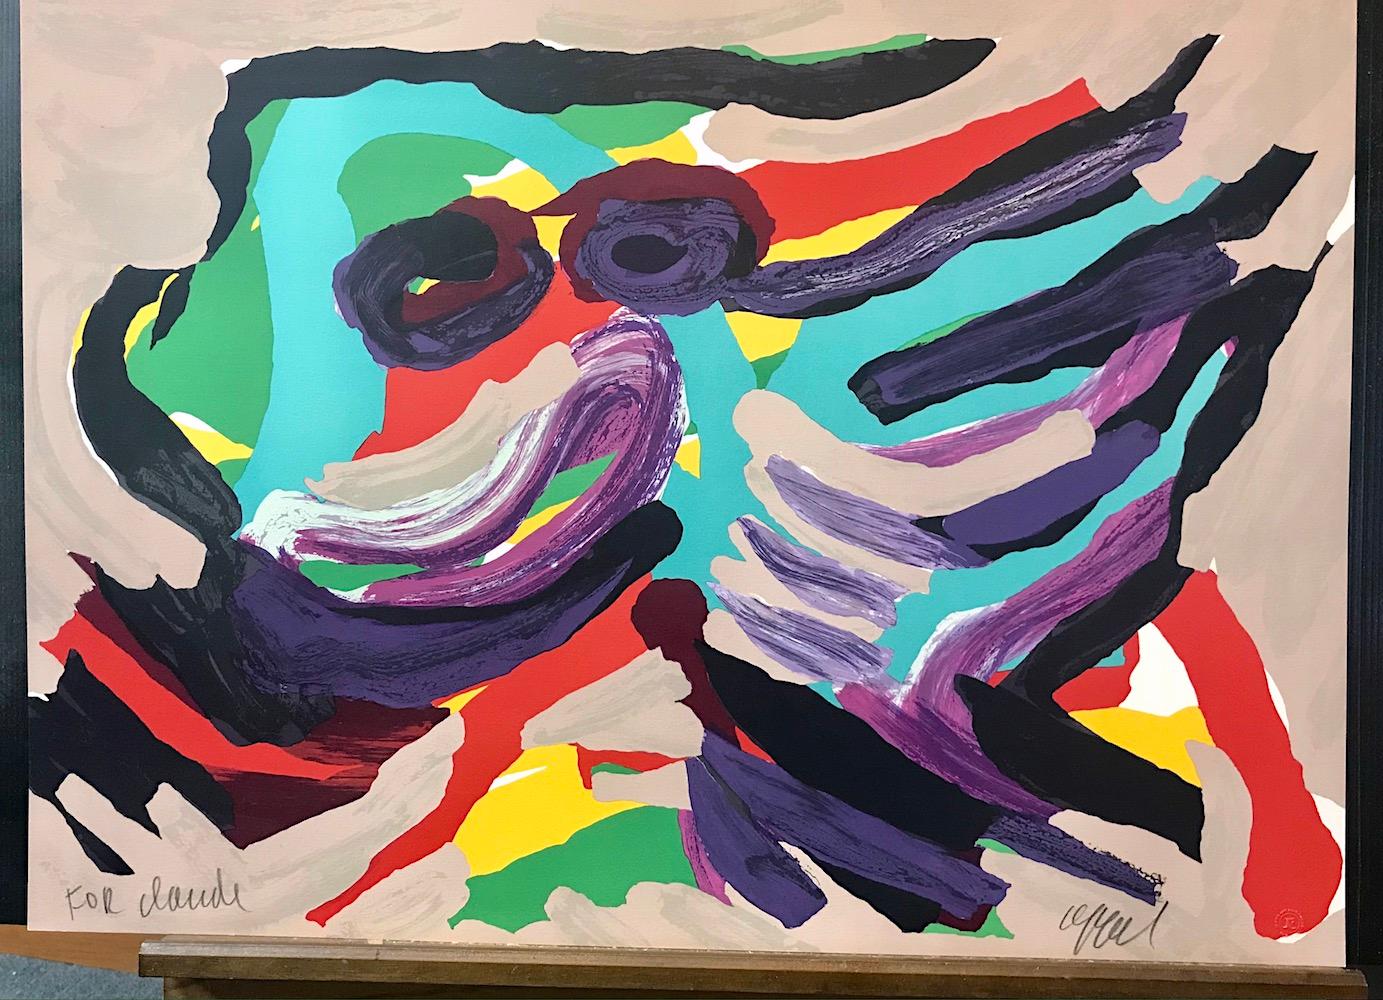 FANTASTIC ANIMAL Signed Lithograph, Abstract Animal, Turquoise Red Purple Beige - Black Animal Print by Karel Appel